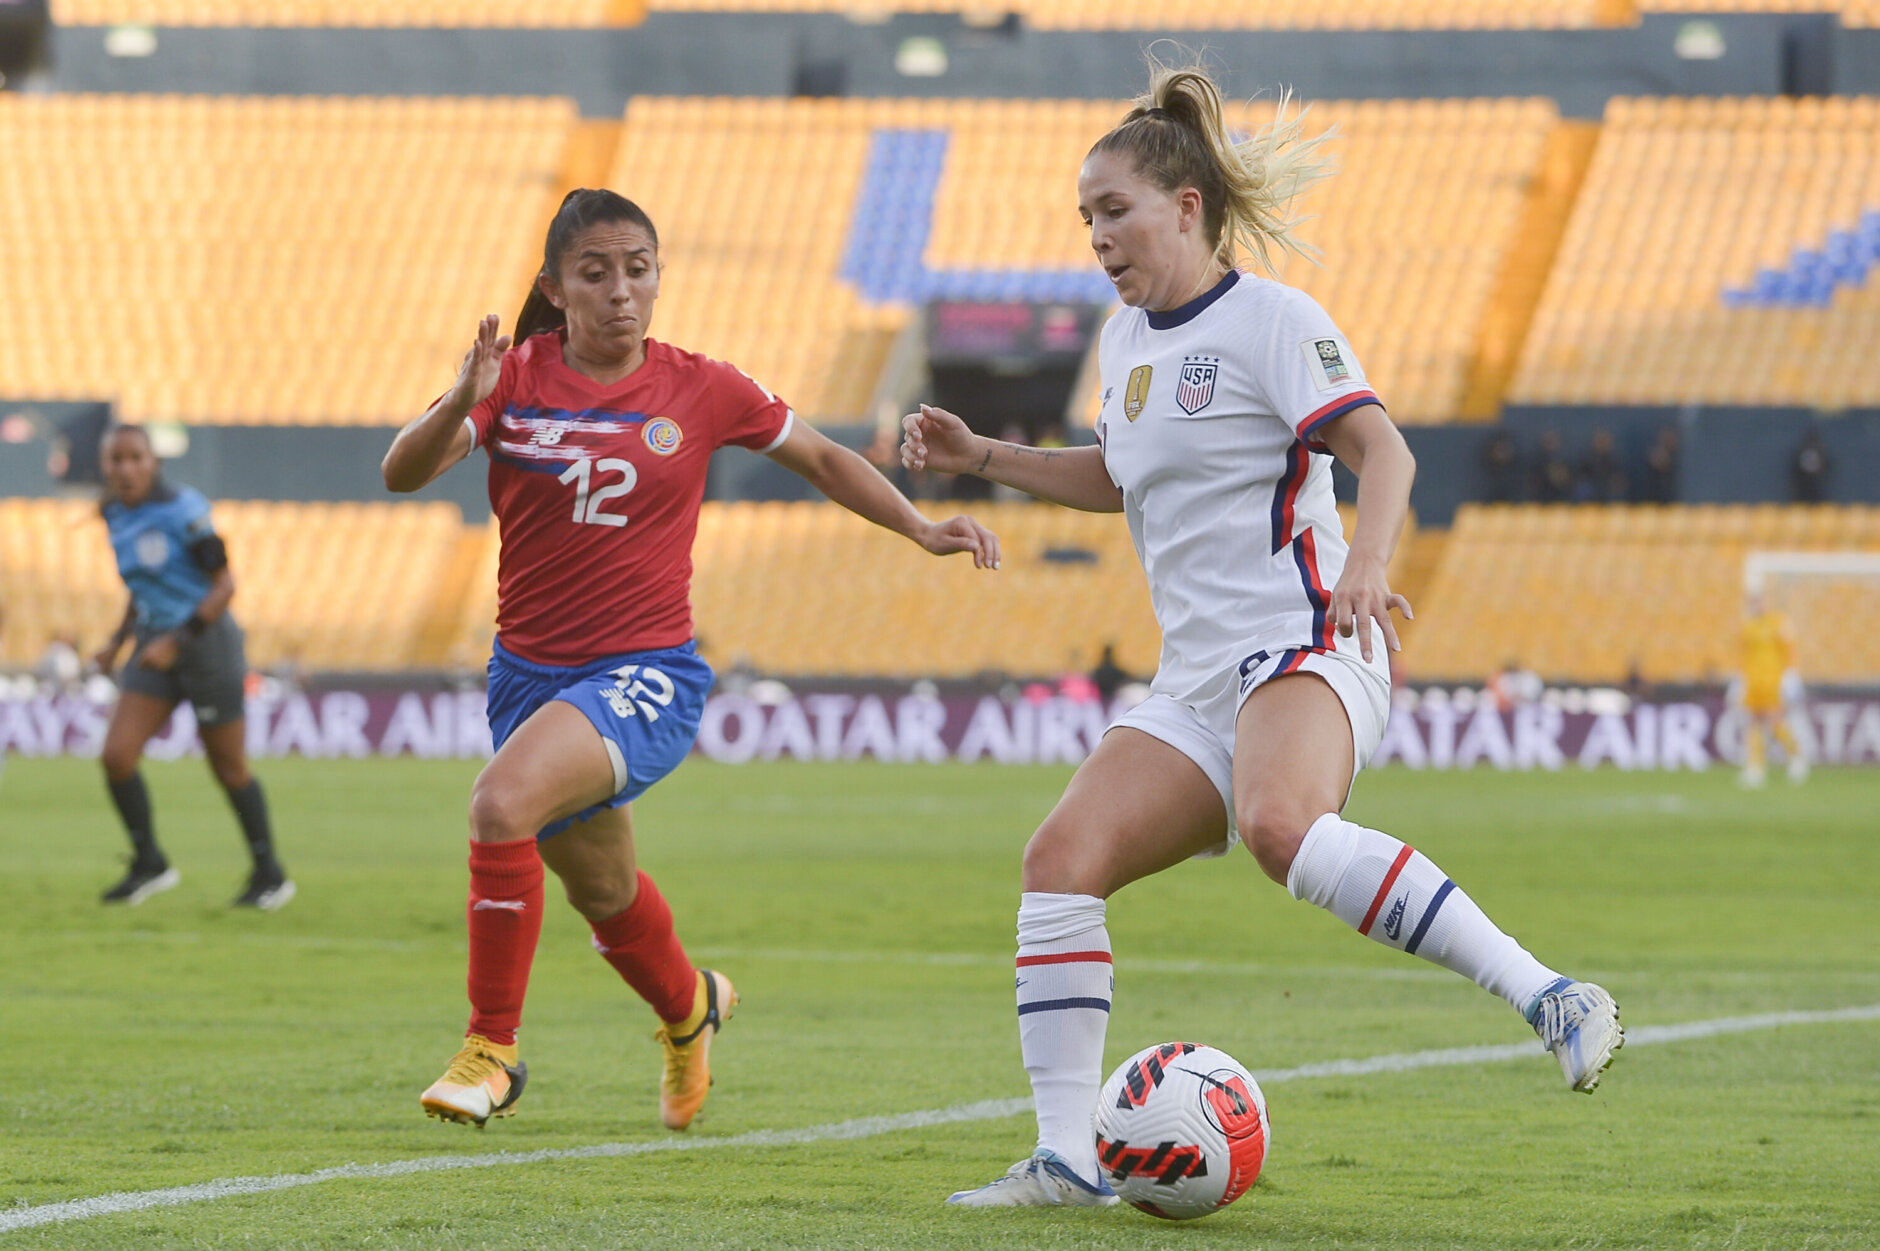 MONTERREY, MEXICO - JULY 14: Ashley Sanchez of USA fights for the ball with Lixy Rodríguez of Costa Rica  during the semifinal between United States and Costa Rica as part of the 2022 Concacaf W Championship at Universitario Stadium on July 14, 2022 in Monterrey, Mexico. (Photo by Azael Rodriguez/Getty Images)